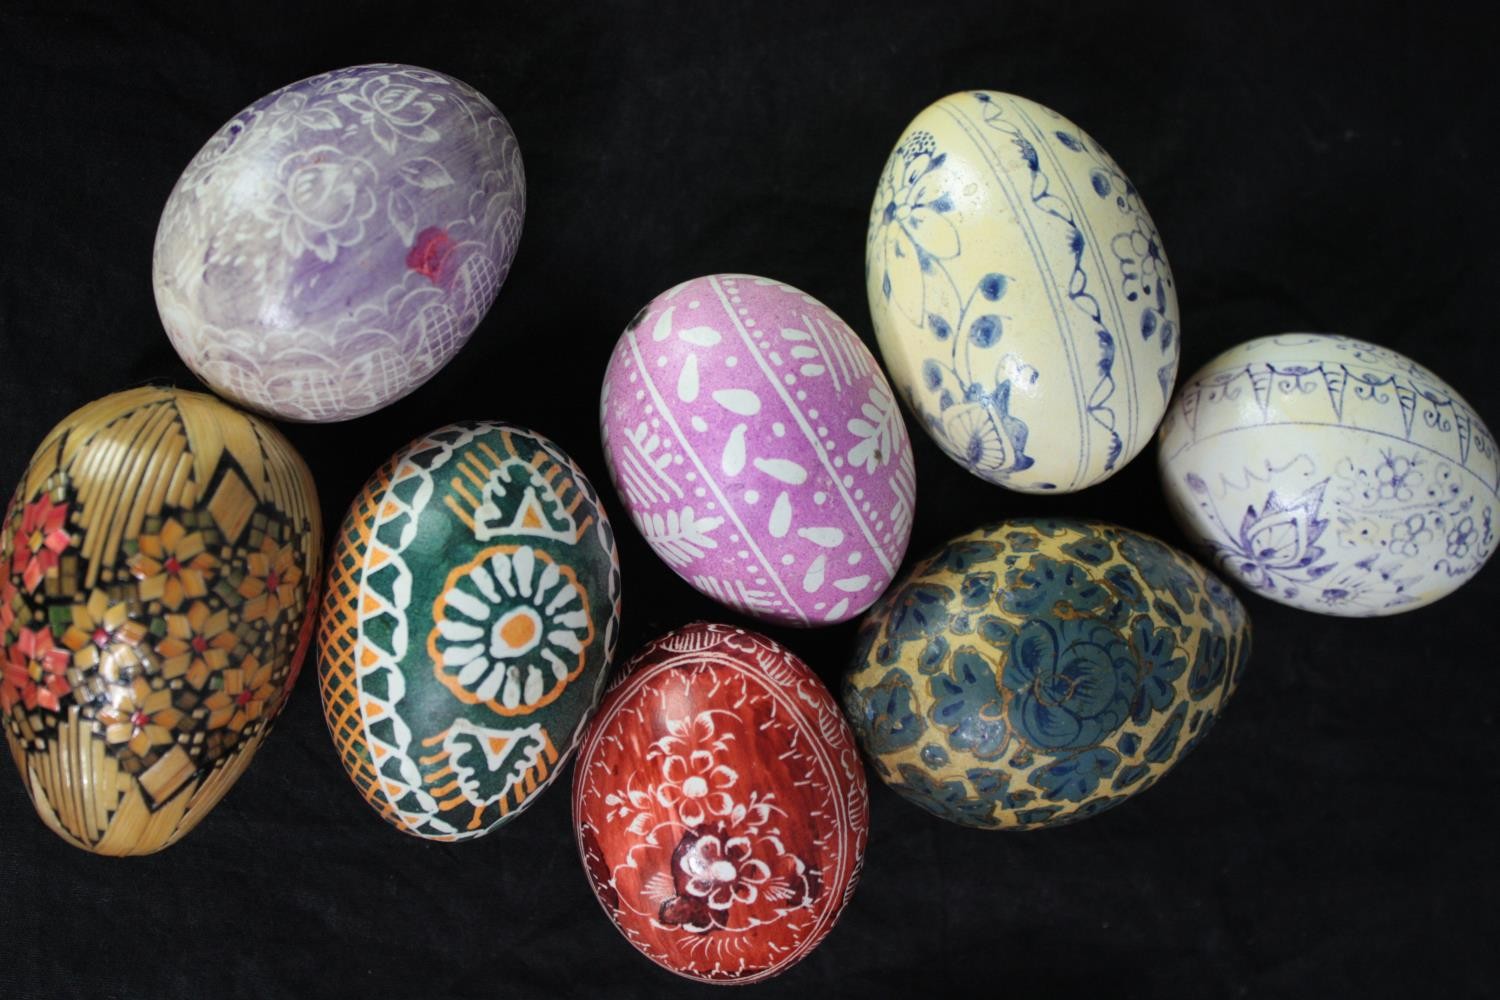 A collection of Czech Kraslice eggs. Hand painted with intricate patterns. H.9 cm. (largest) - Image 8 of 9